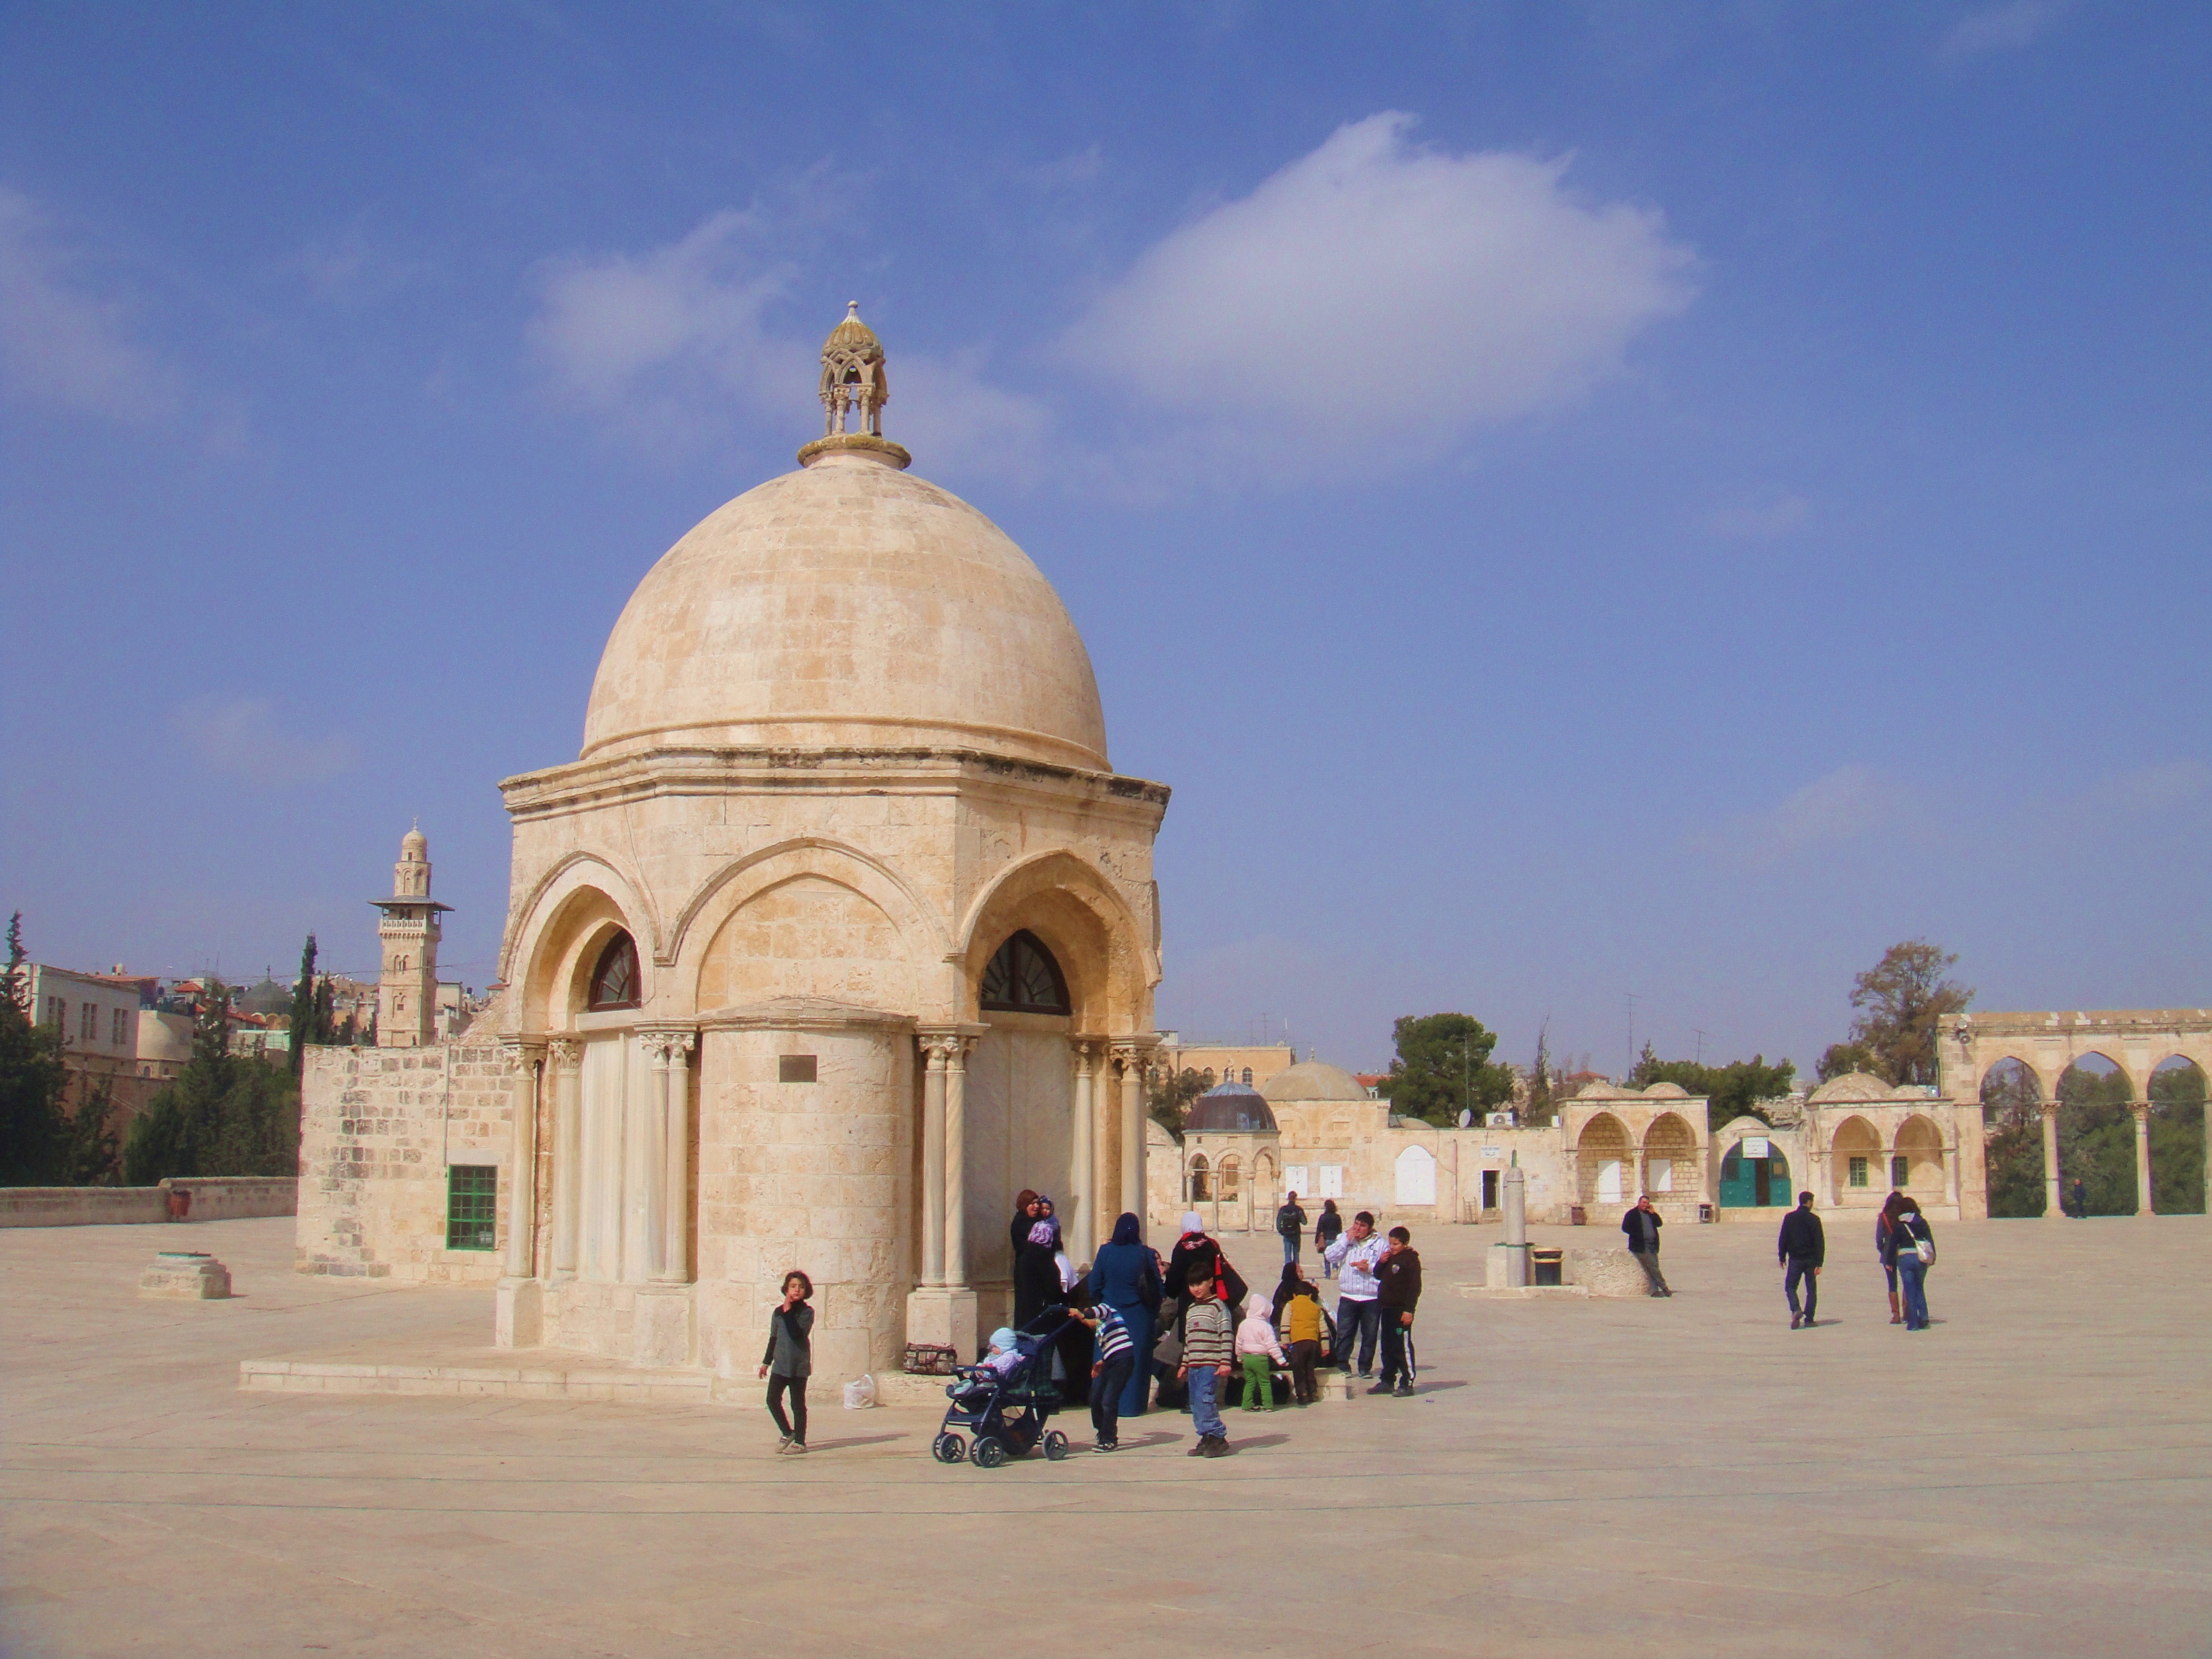 Jerusalem: The Temple Mount And The Dome Of The Rock | The Velvet Rocket